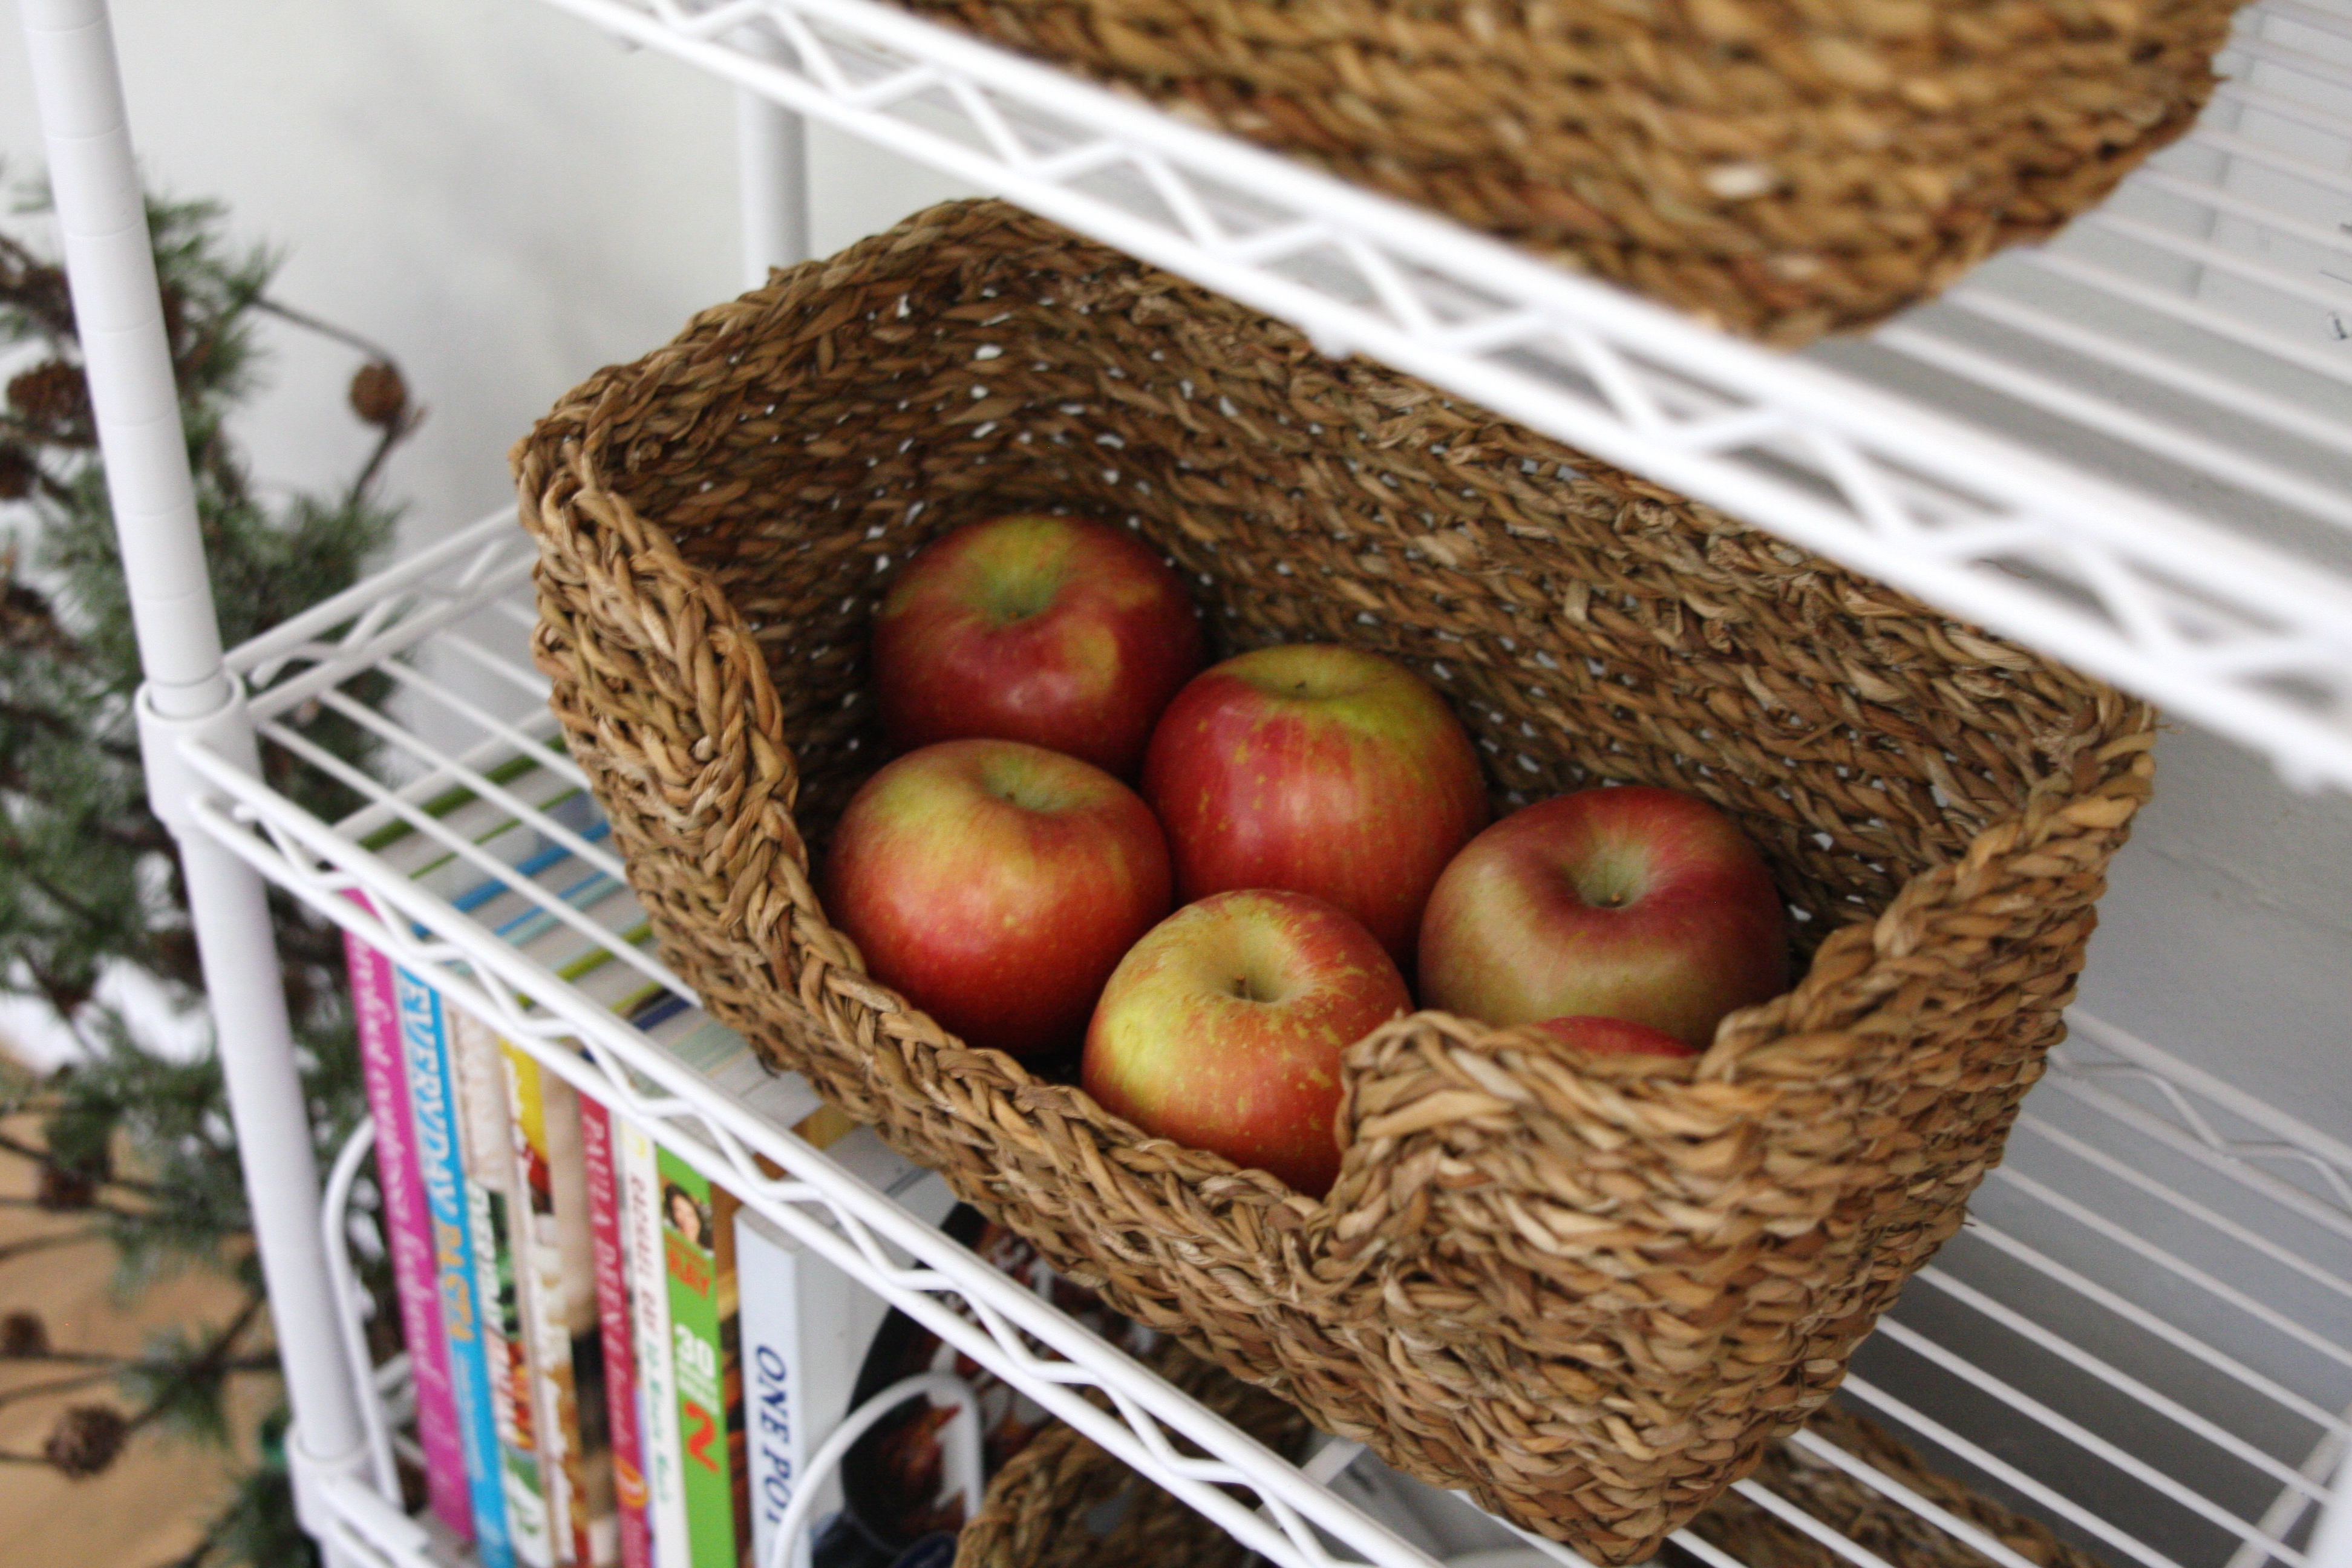 Small Space Kitchen Organizing: Add A Shelf with Baskets - Simply Organized